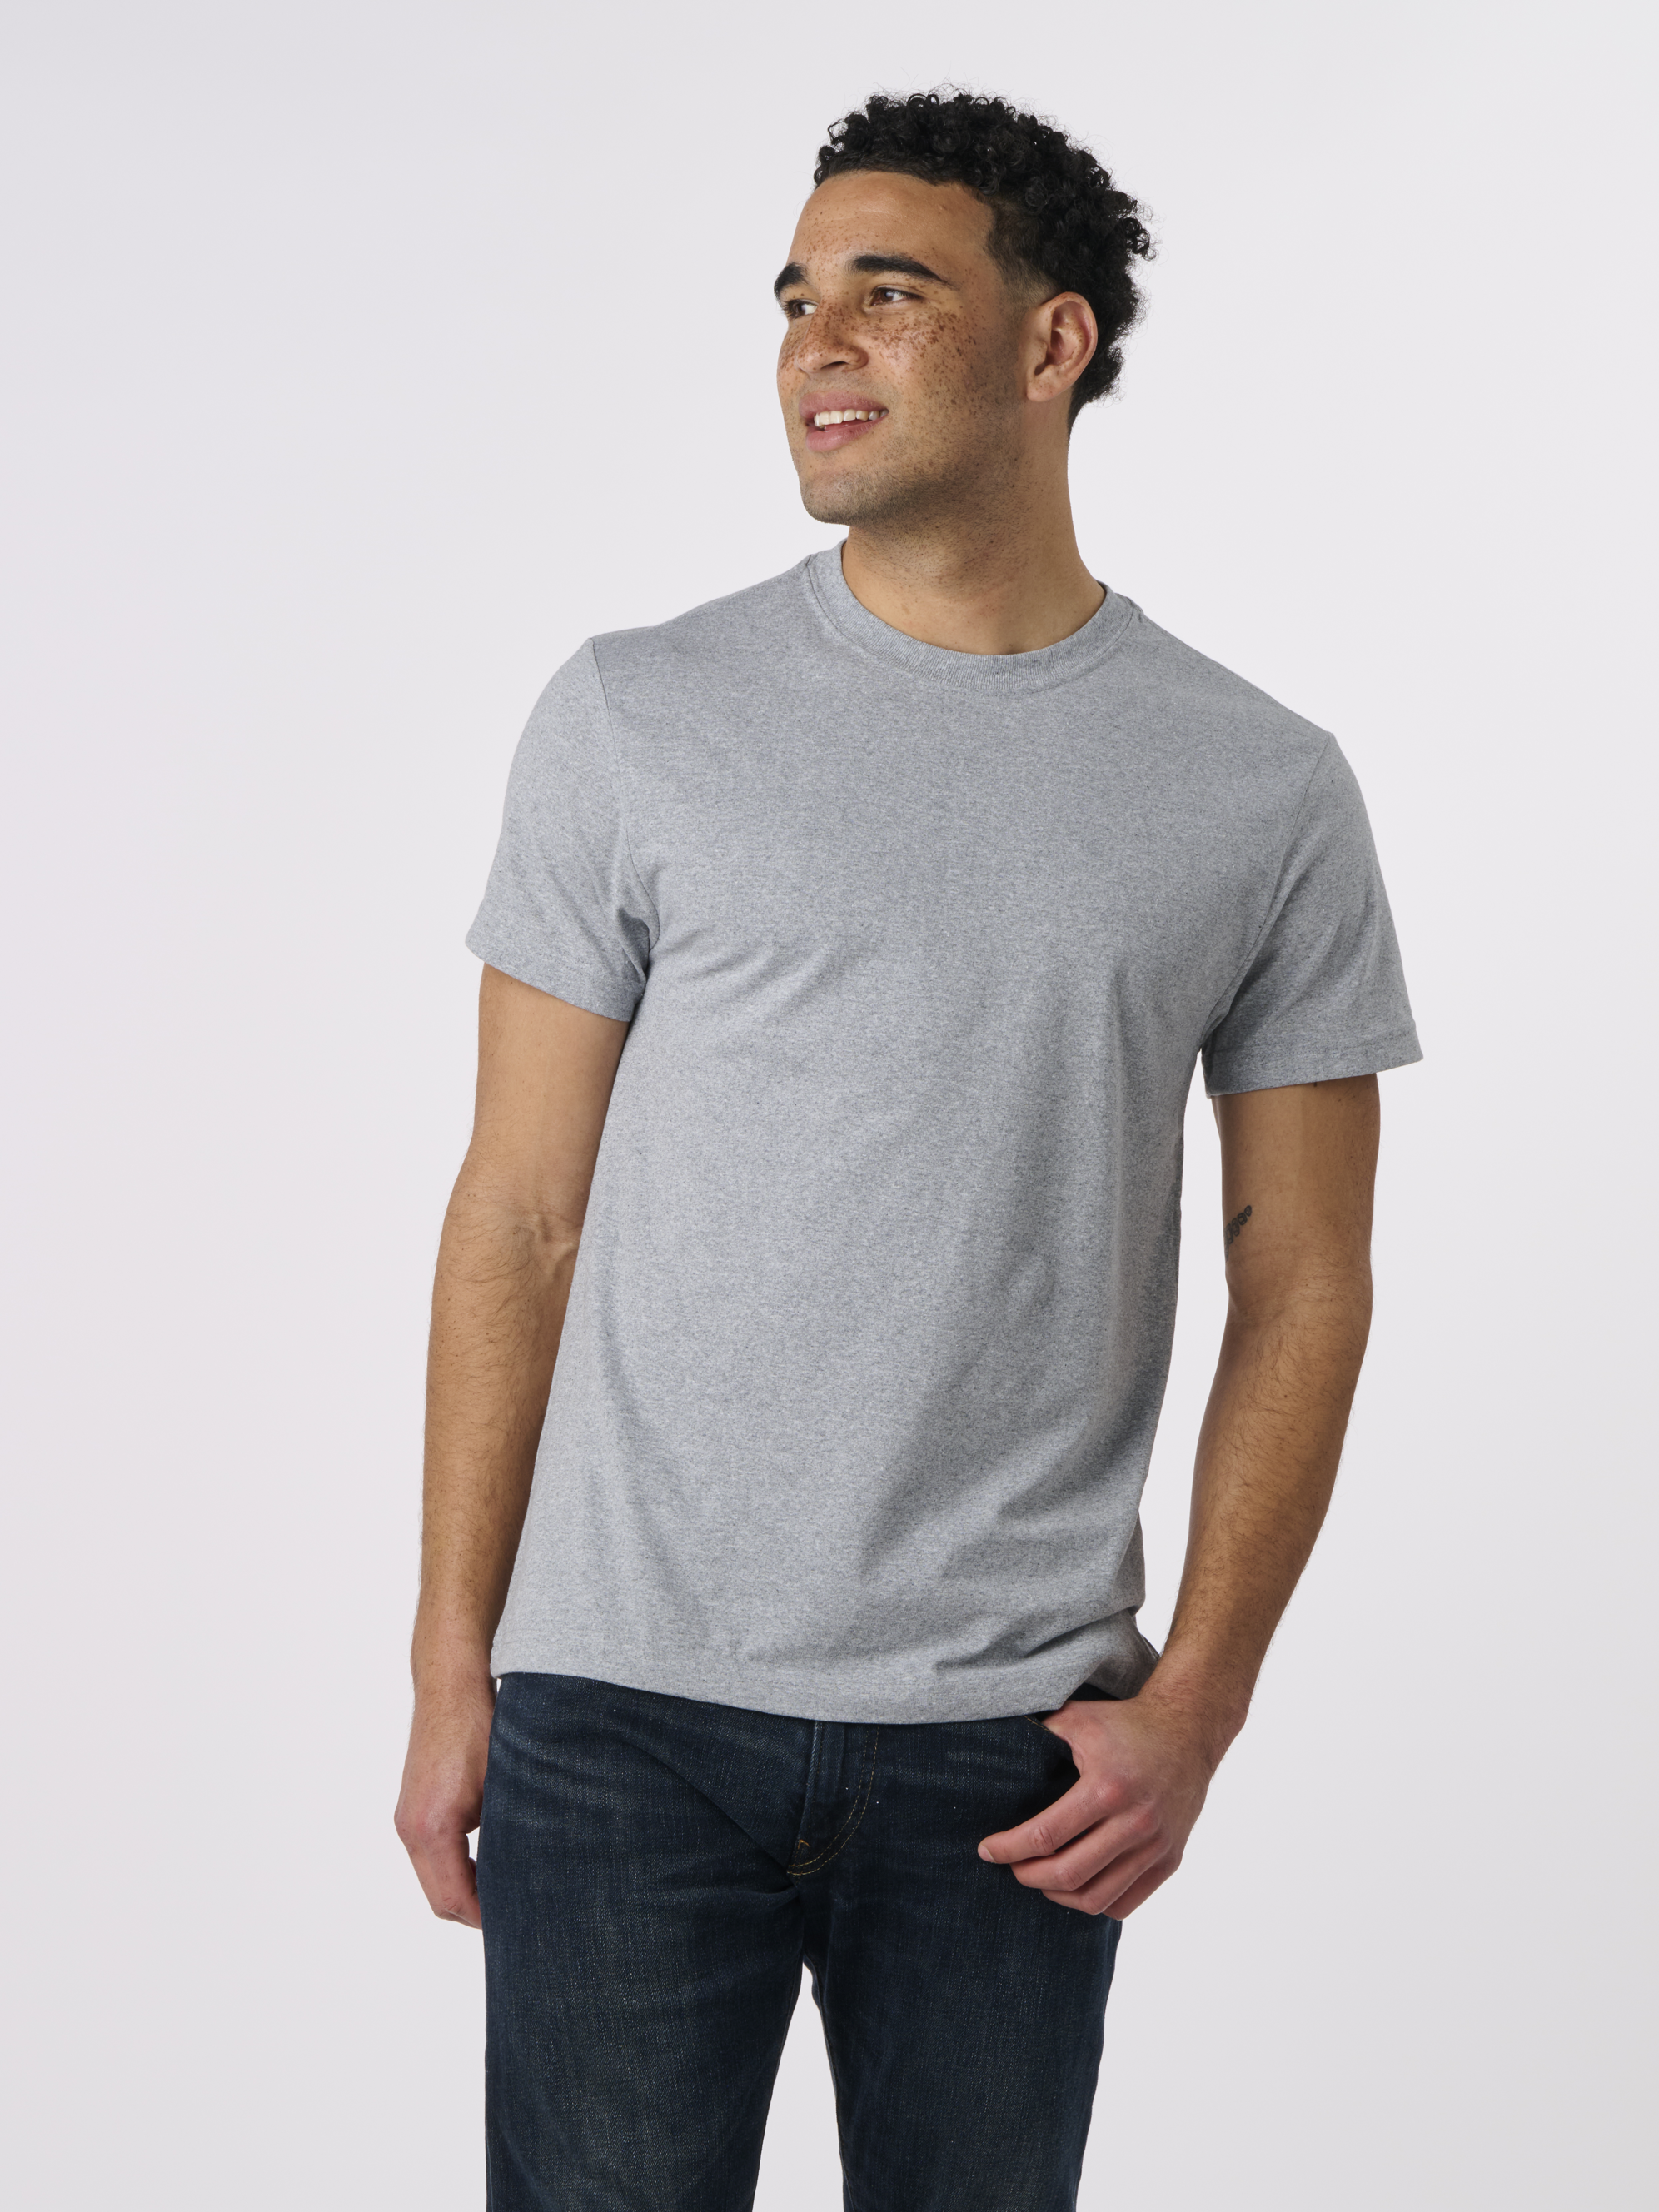 RECOVER_EC100_ECOSHORTSLEEVETSHIRT_ASH_FRONT.png